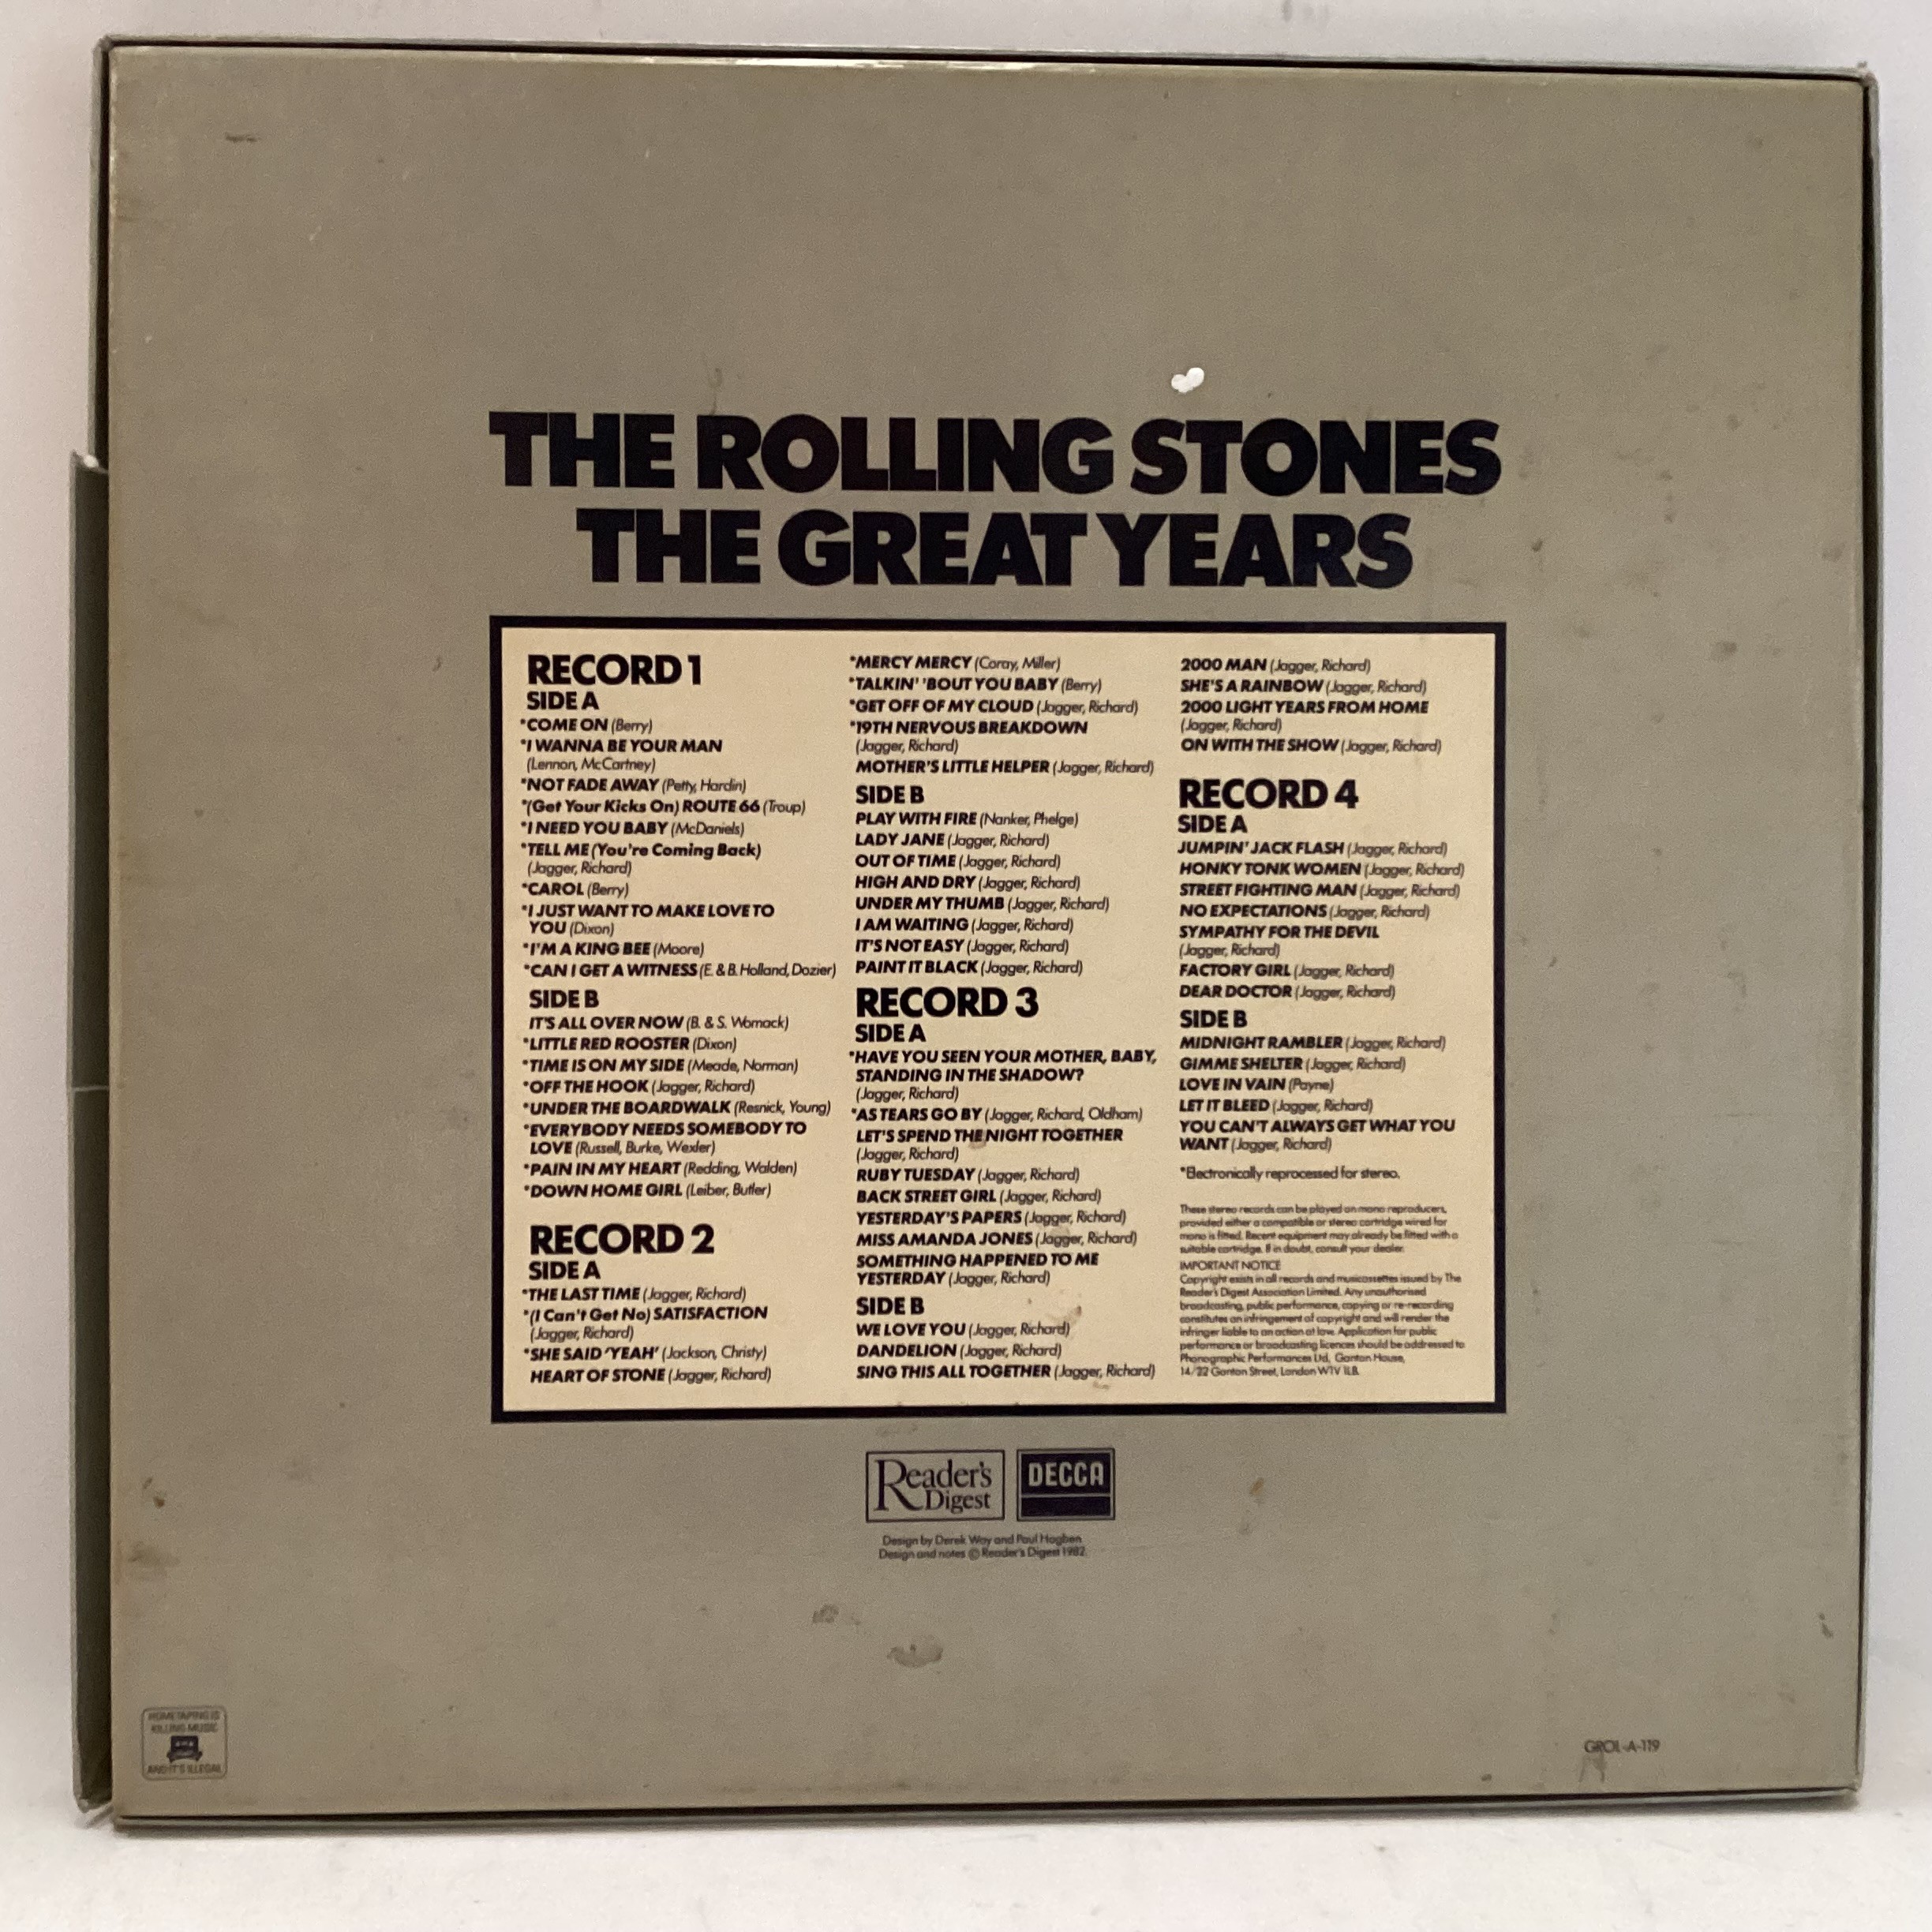 THE ROLLING STONES ‘THE GREAT YEARS” SUPERB 4 LP BOX SET. This is a 4LP BOX SET of The Rolling - Image 3 of 4